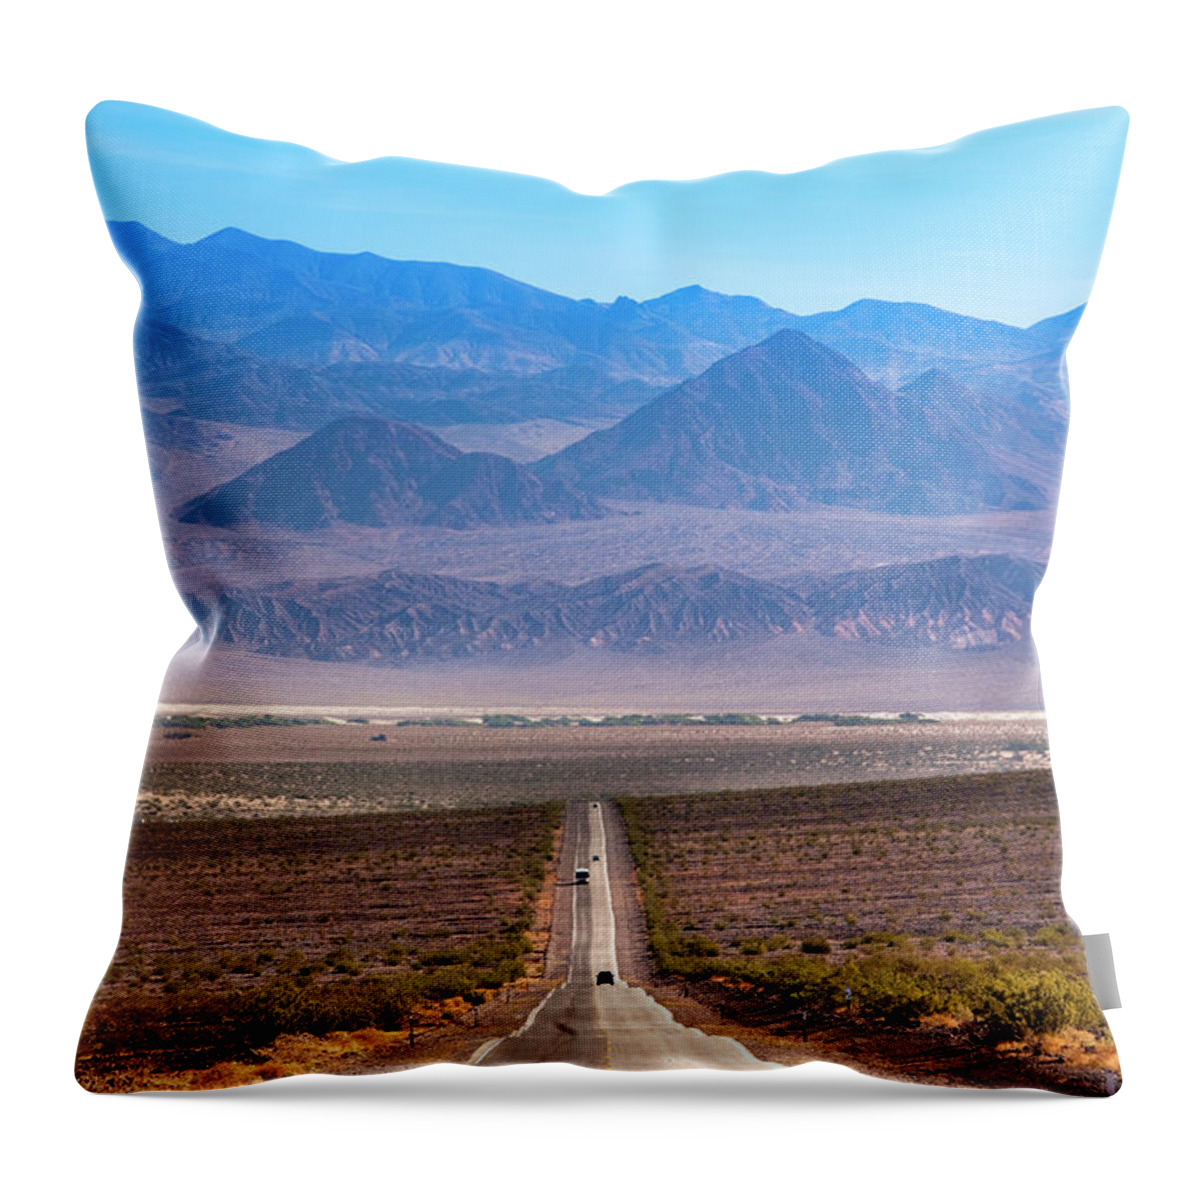 Scenics Throw Pillow featuring the photograph Death Valley National Park by Walter Bibikow